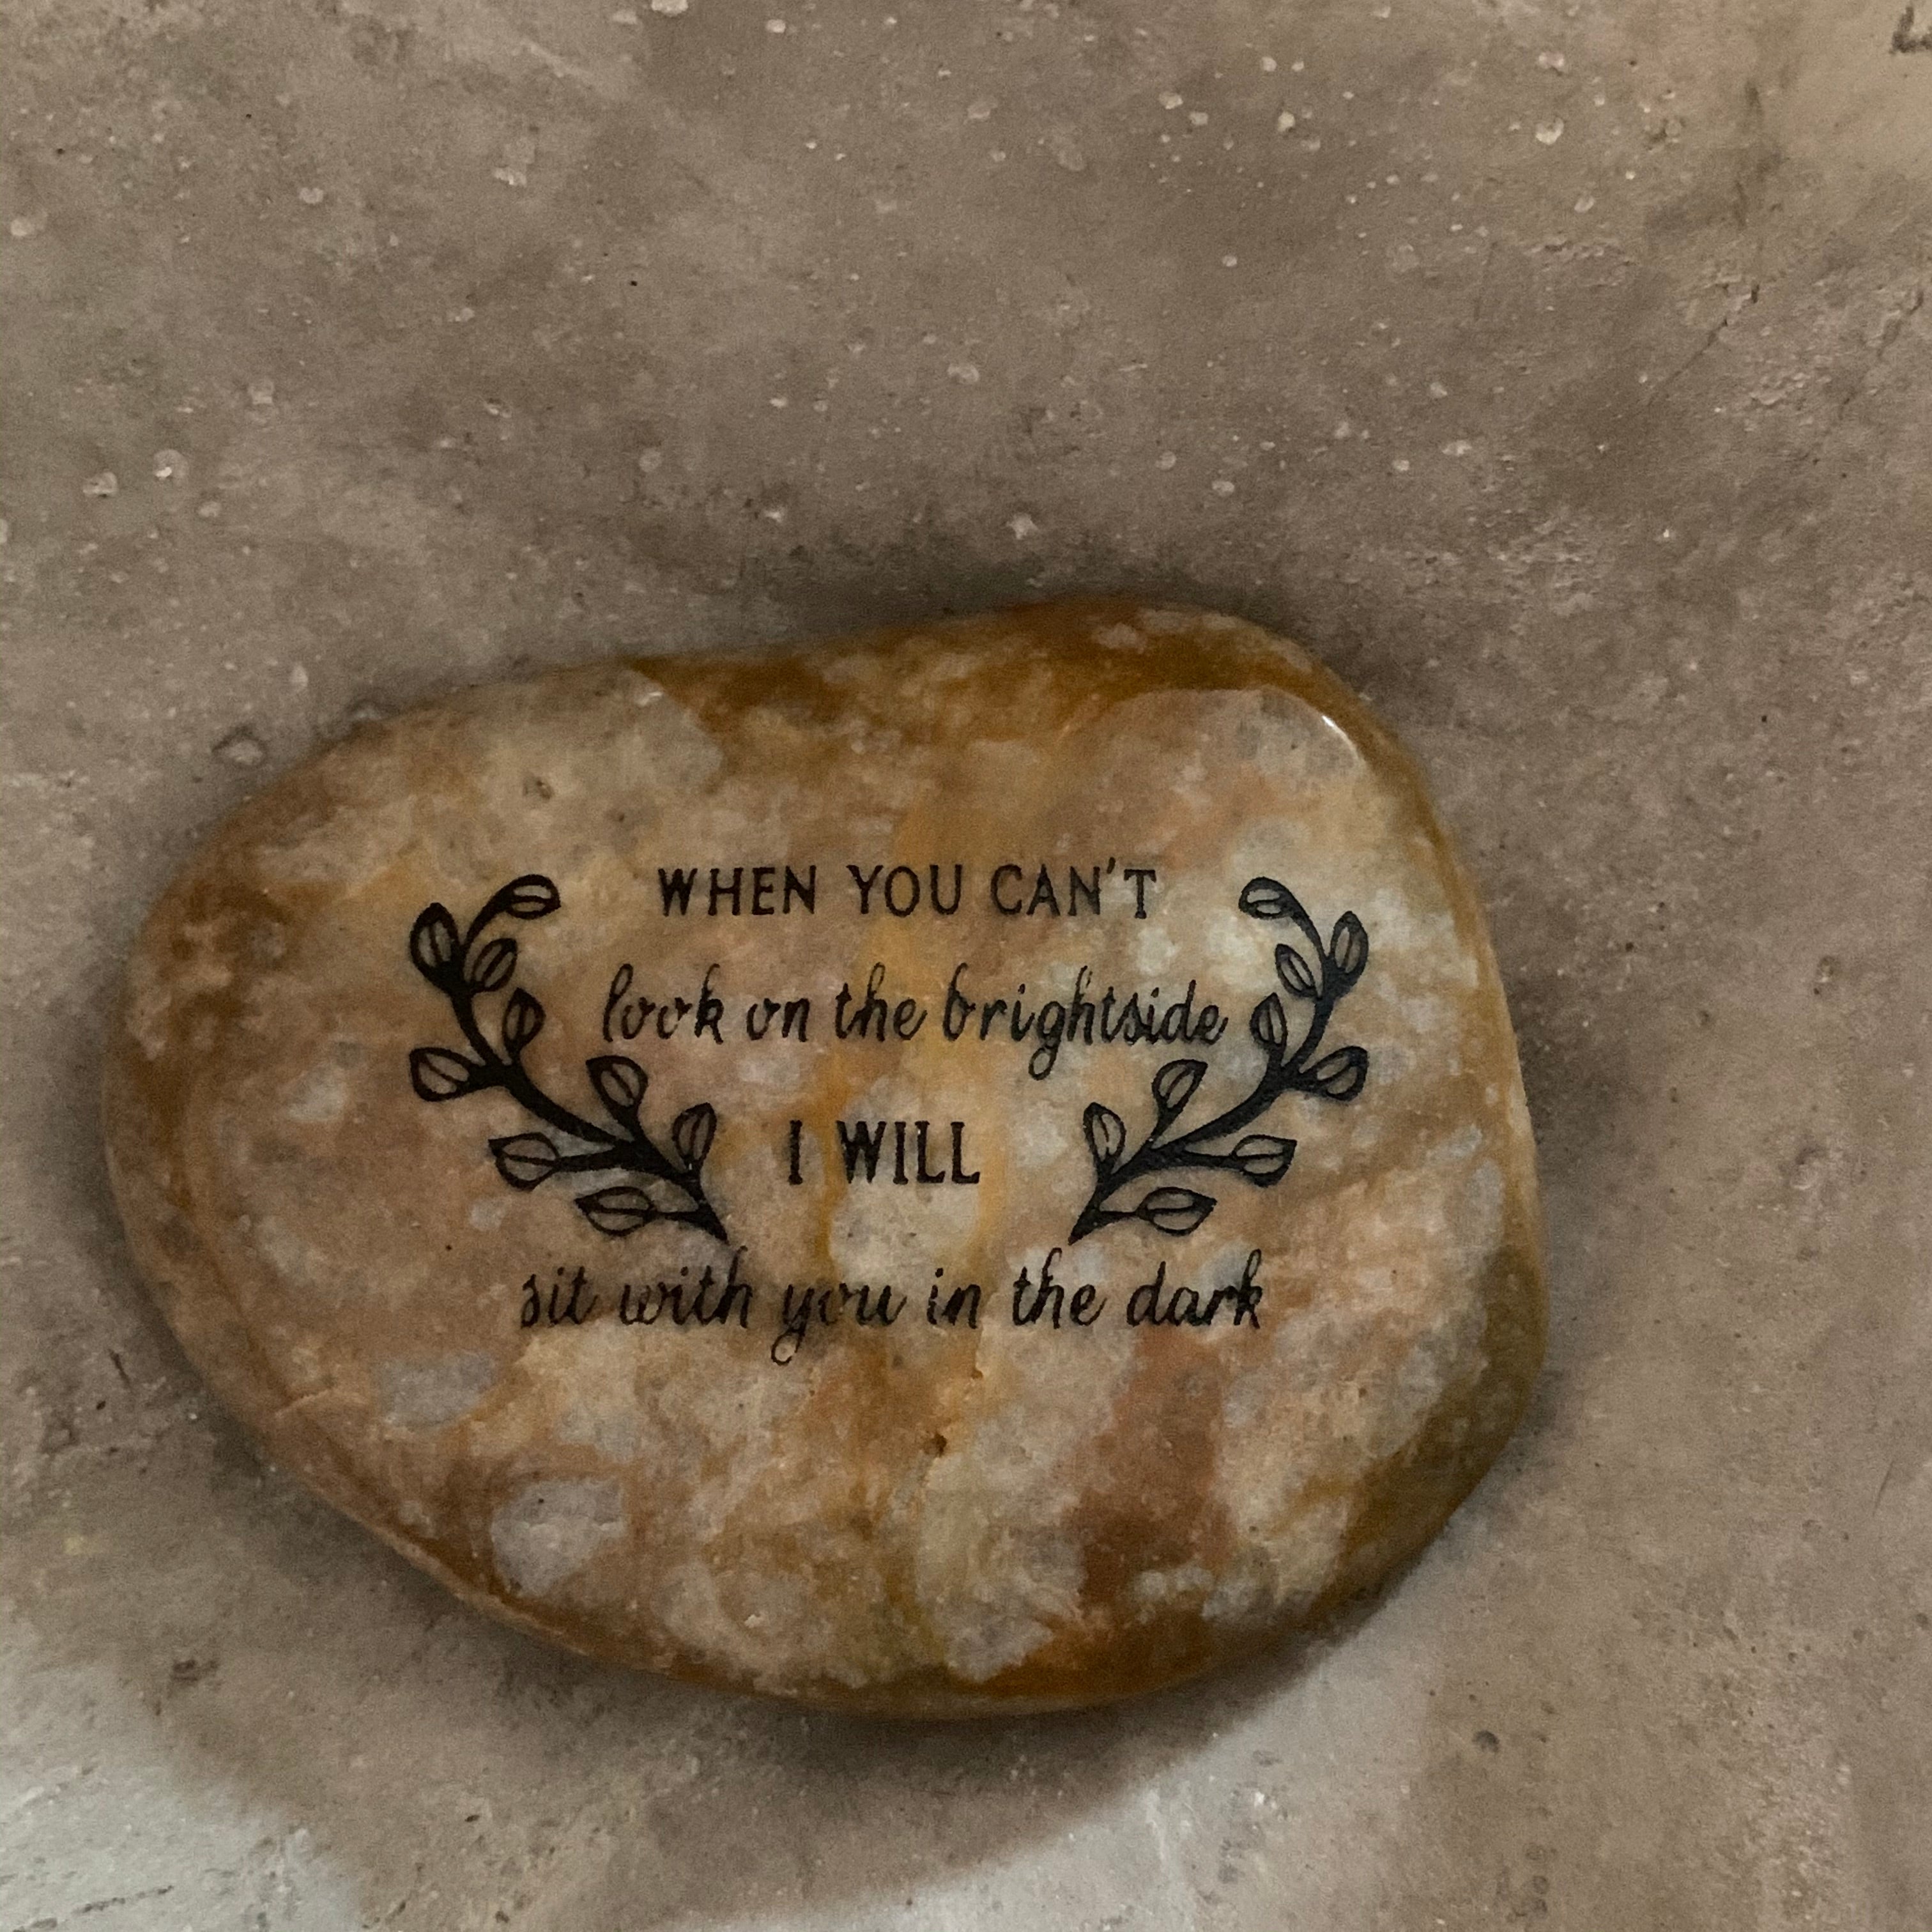 When you Can't Look On The Brightside I Will Sit With You In The Dark ~ Engraved Inspirational Rock